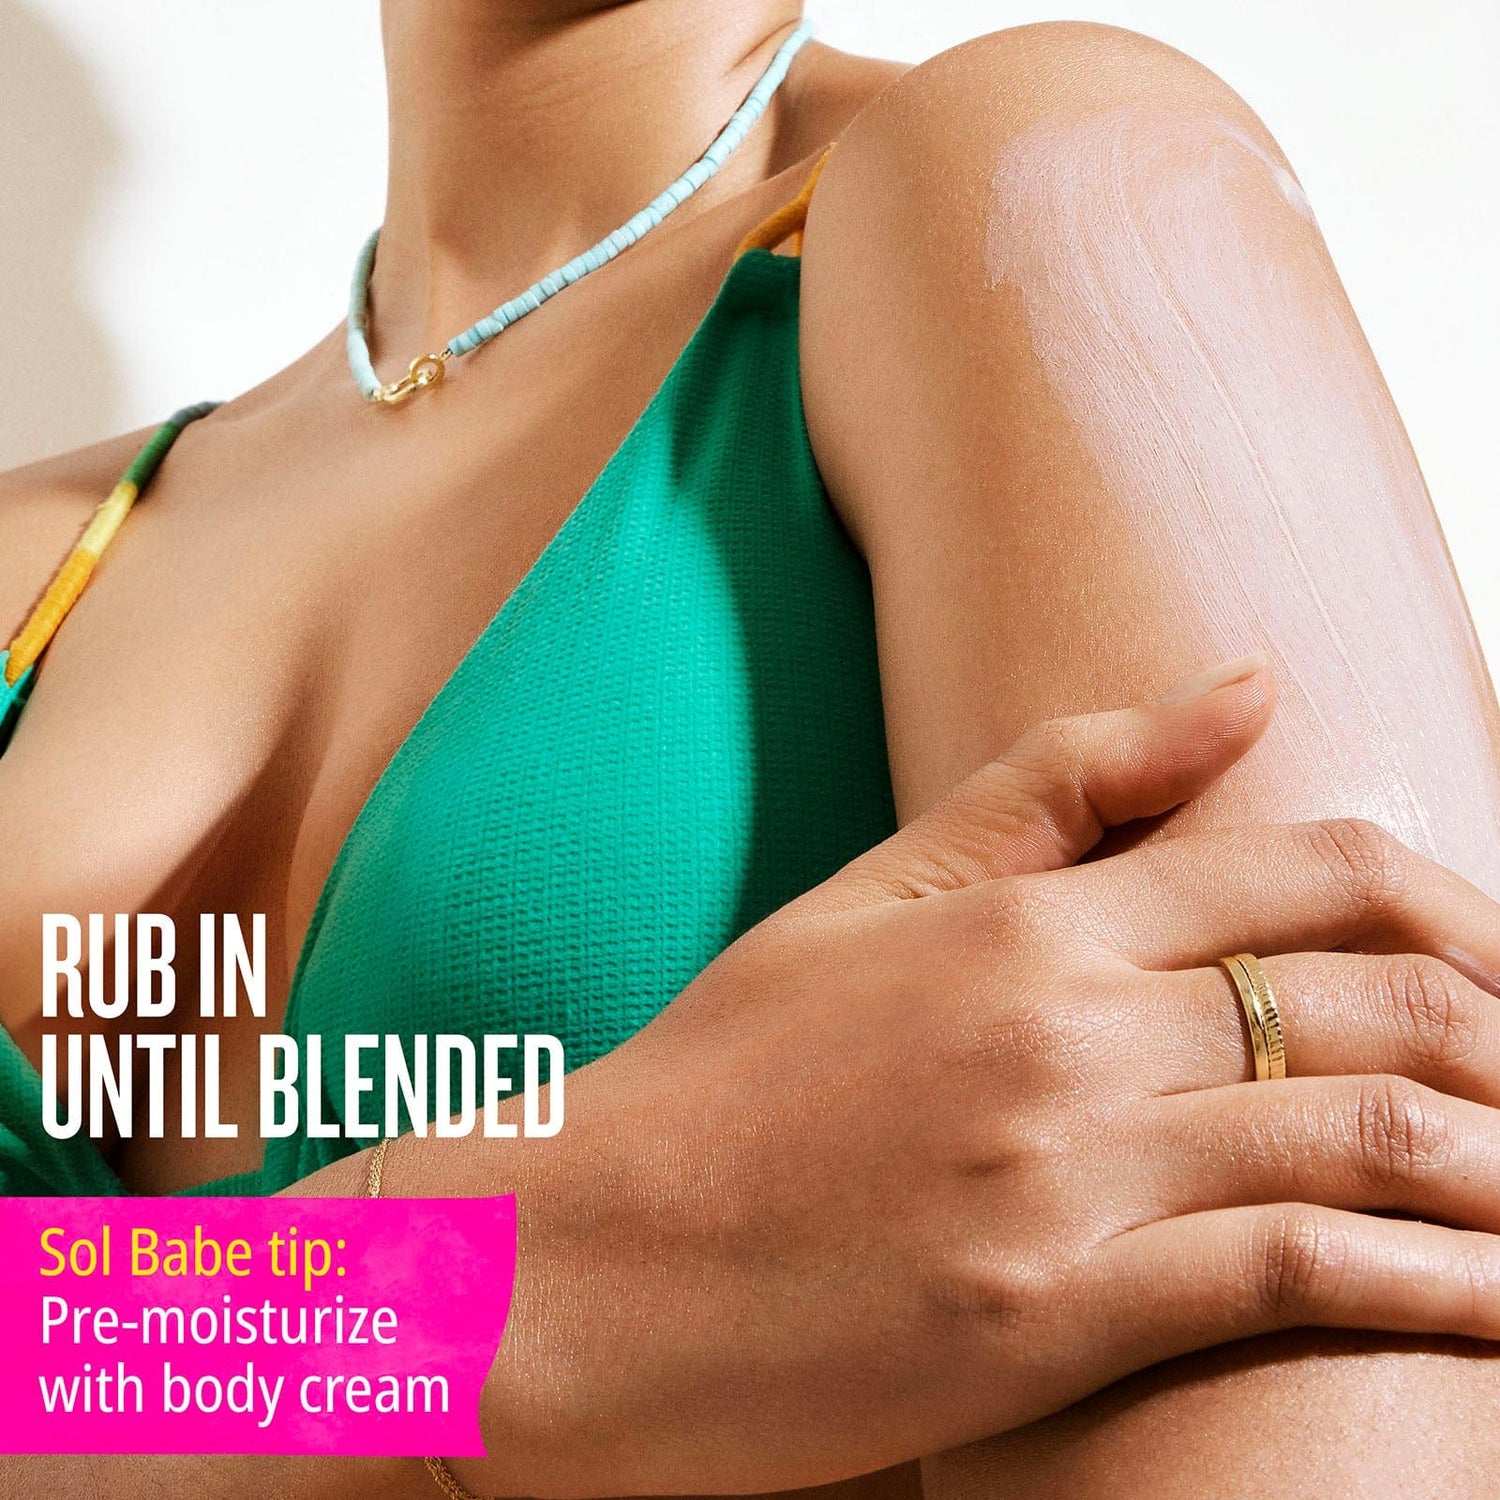 Rub in until blended - sol babe tip: pre-moisturize with body cream